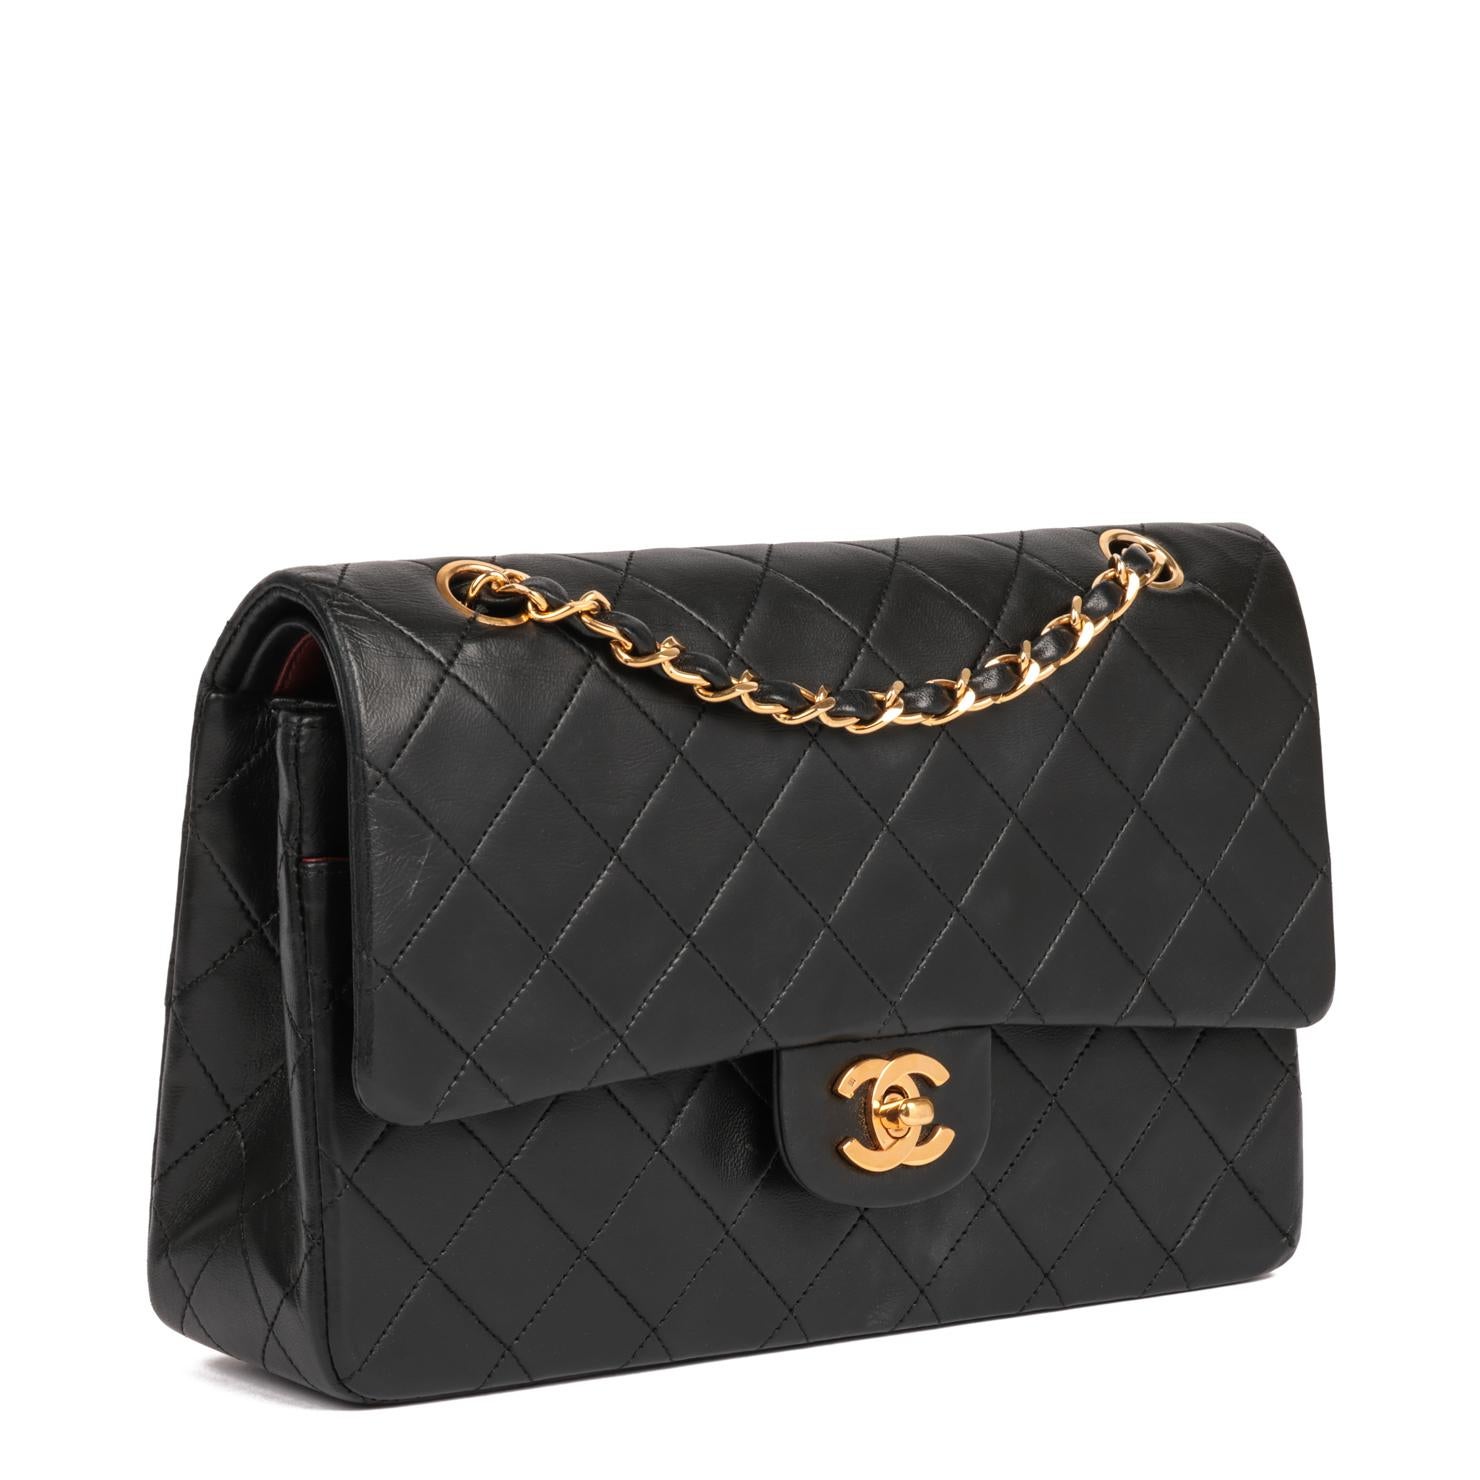 CHANEL
Black Quilted Lambskin Vintage Medium Classic Double Flap Bag

Xupes Reference: CB895
Serial Number: 615339
Age (Circa): 1988
Accompanied By: Chanel Dust Bag, Box, Care Booklet 
Authenticity Details: Serial Sticker (Made in France)
Gender: